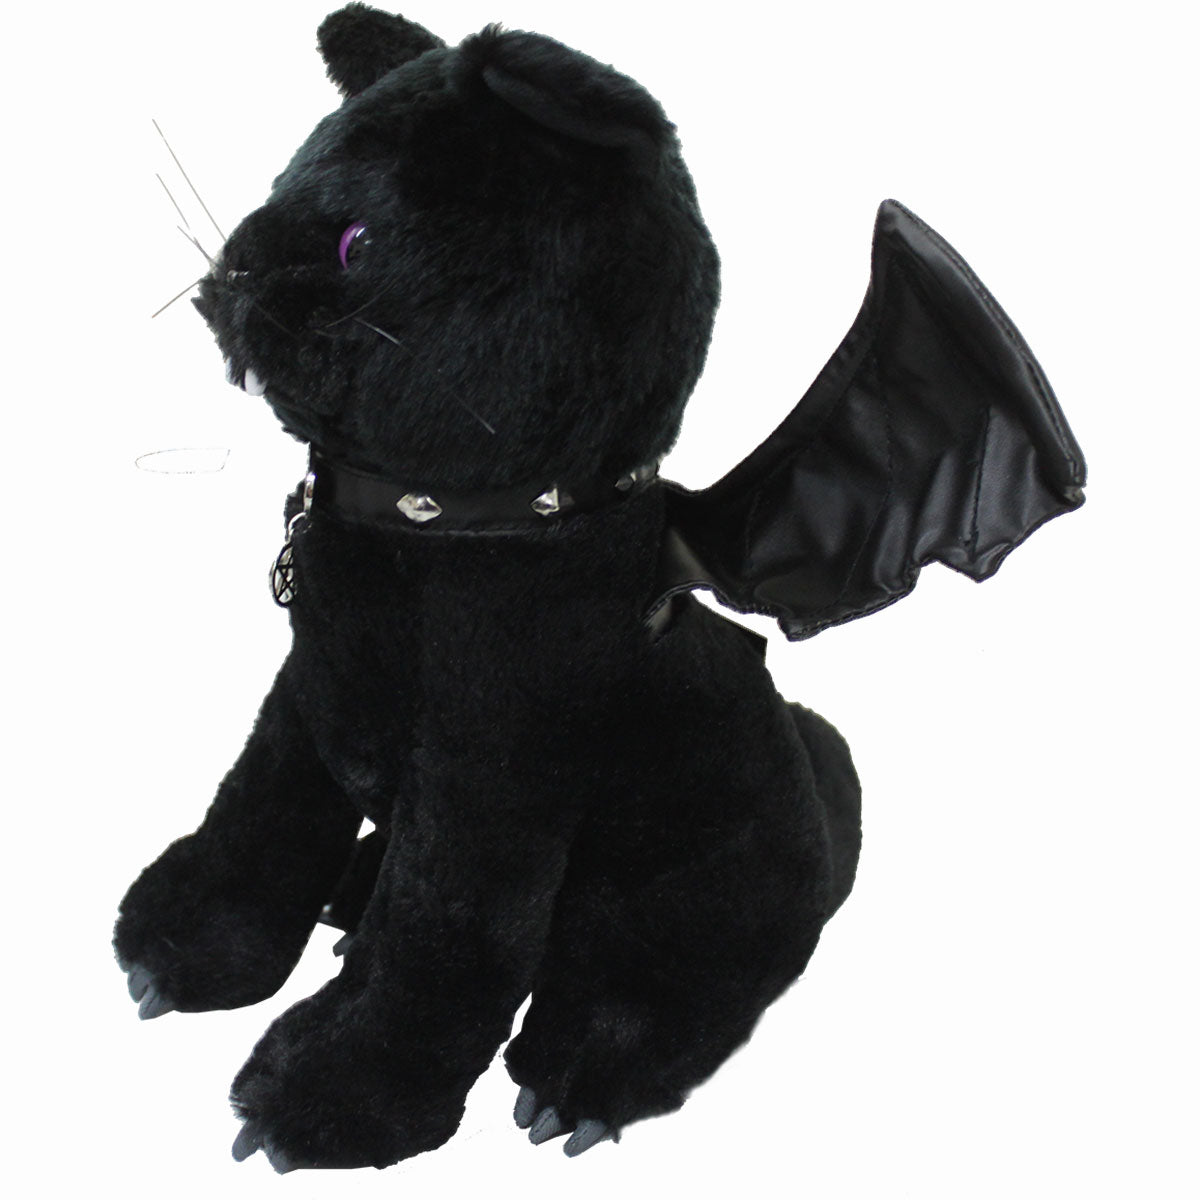 BAT CAT - Winged Collectable Soft Plush Toy 12 inch